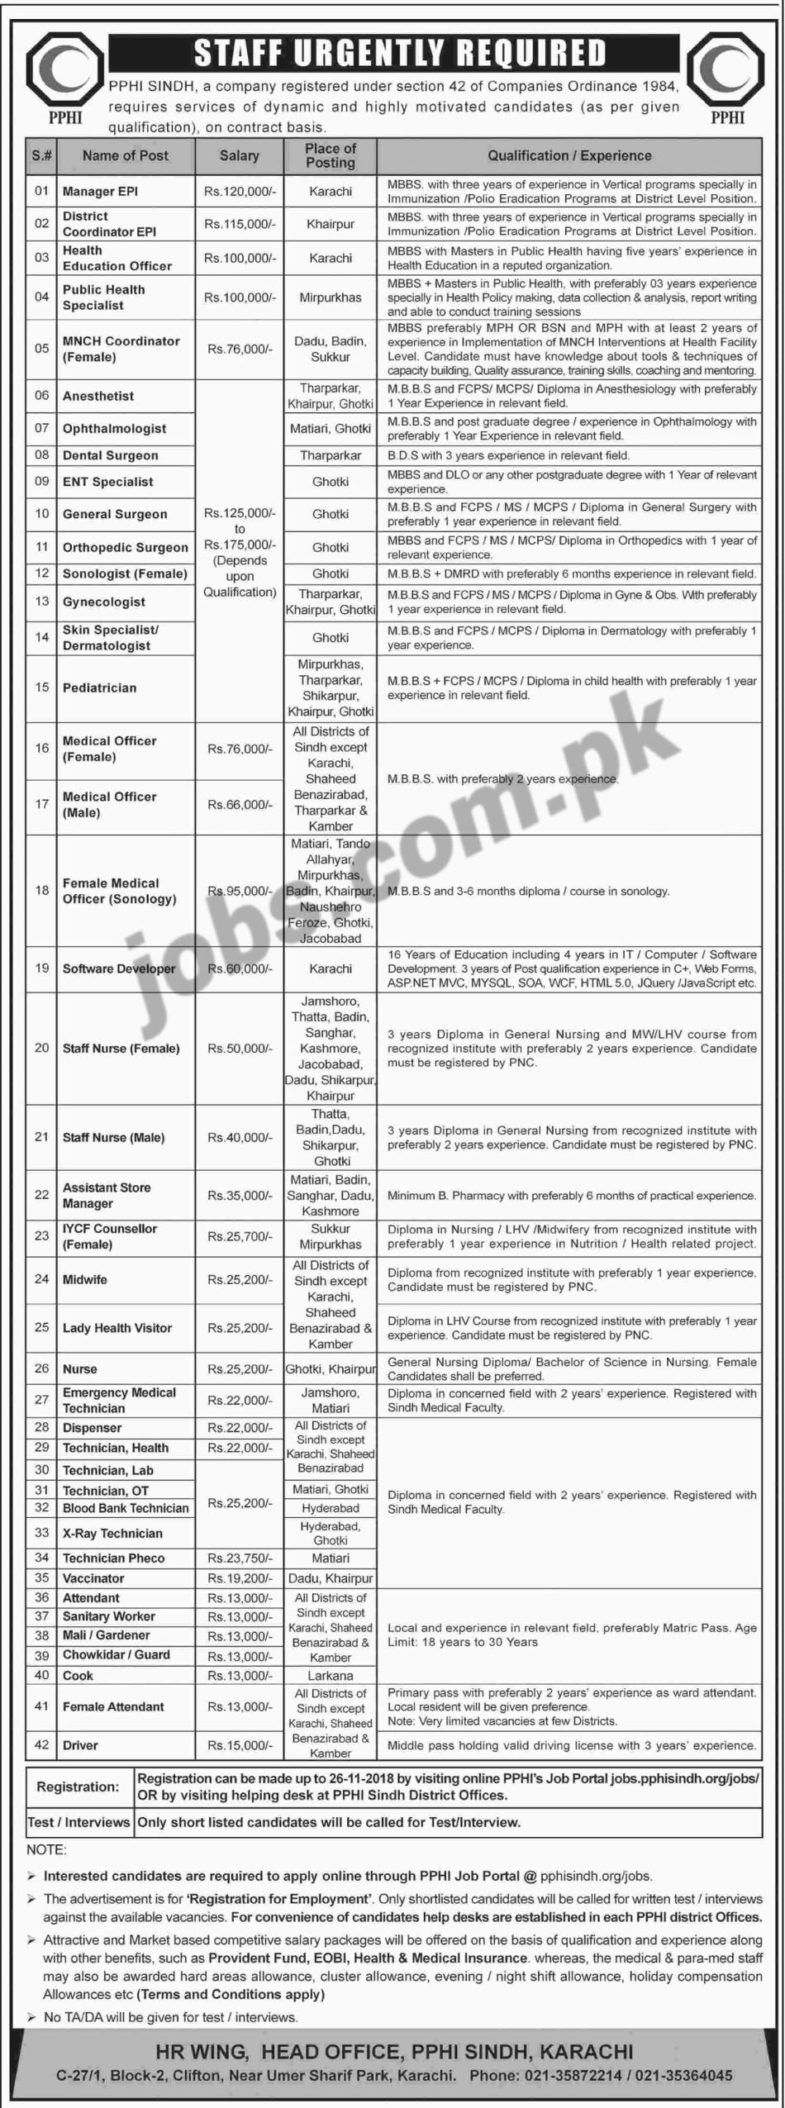 PPHI Sindh Jobs 2018 for 100+ IT, Store Managers, EPI, Staff Nurses, Medical & Support Staff (Multiple Cities)